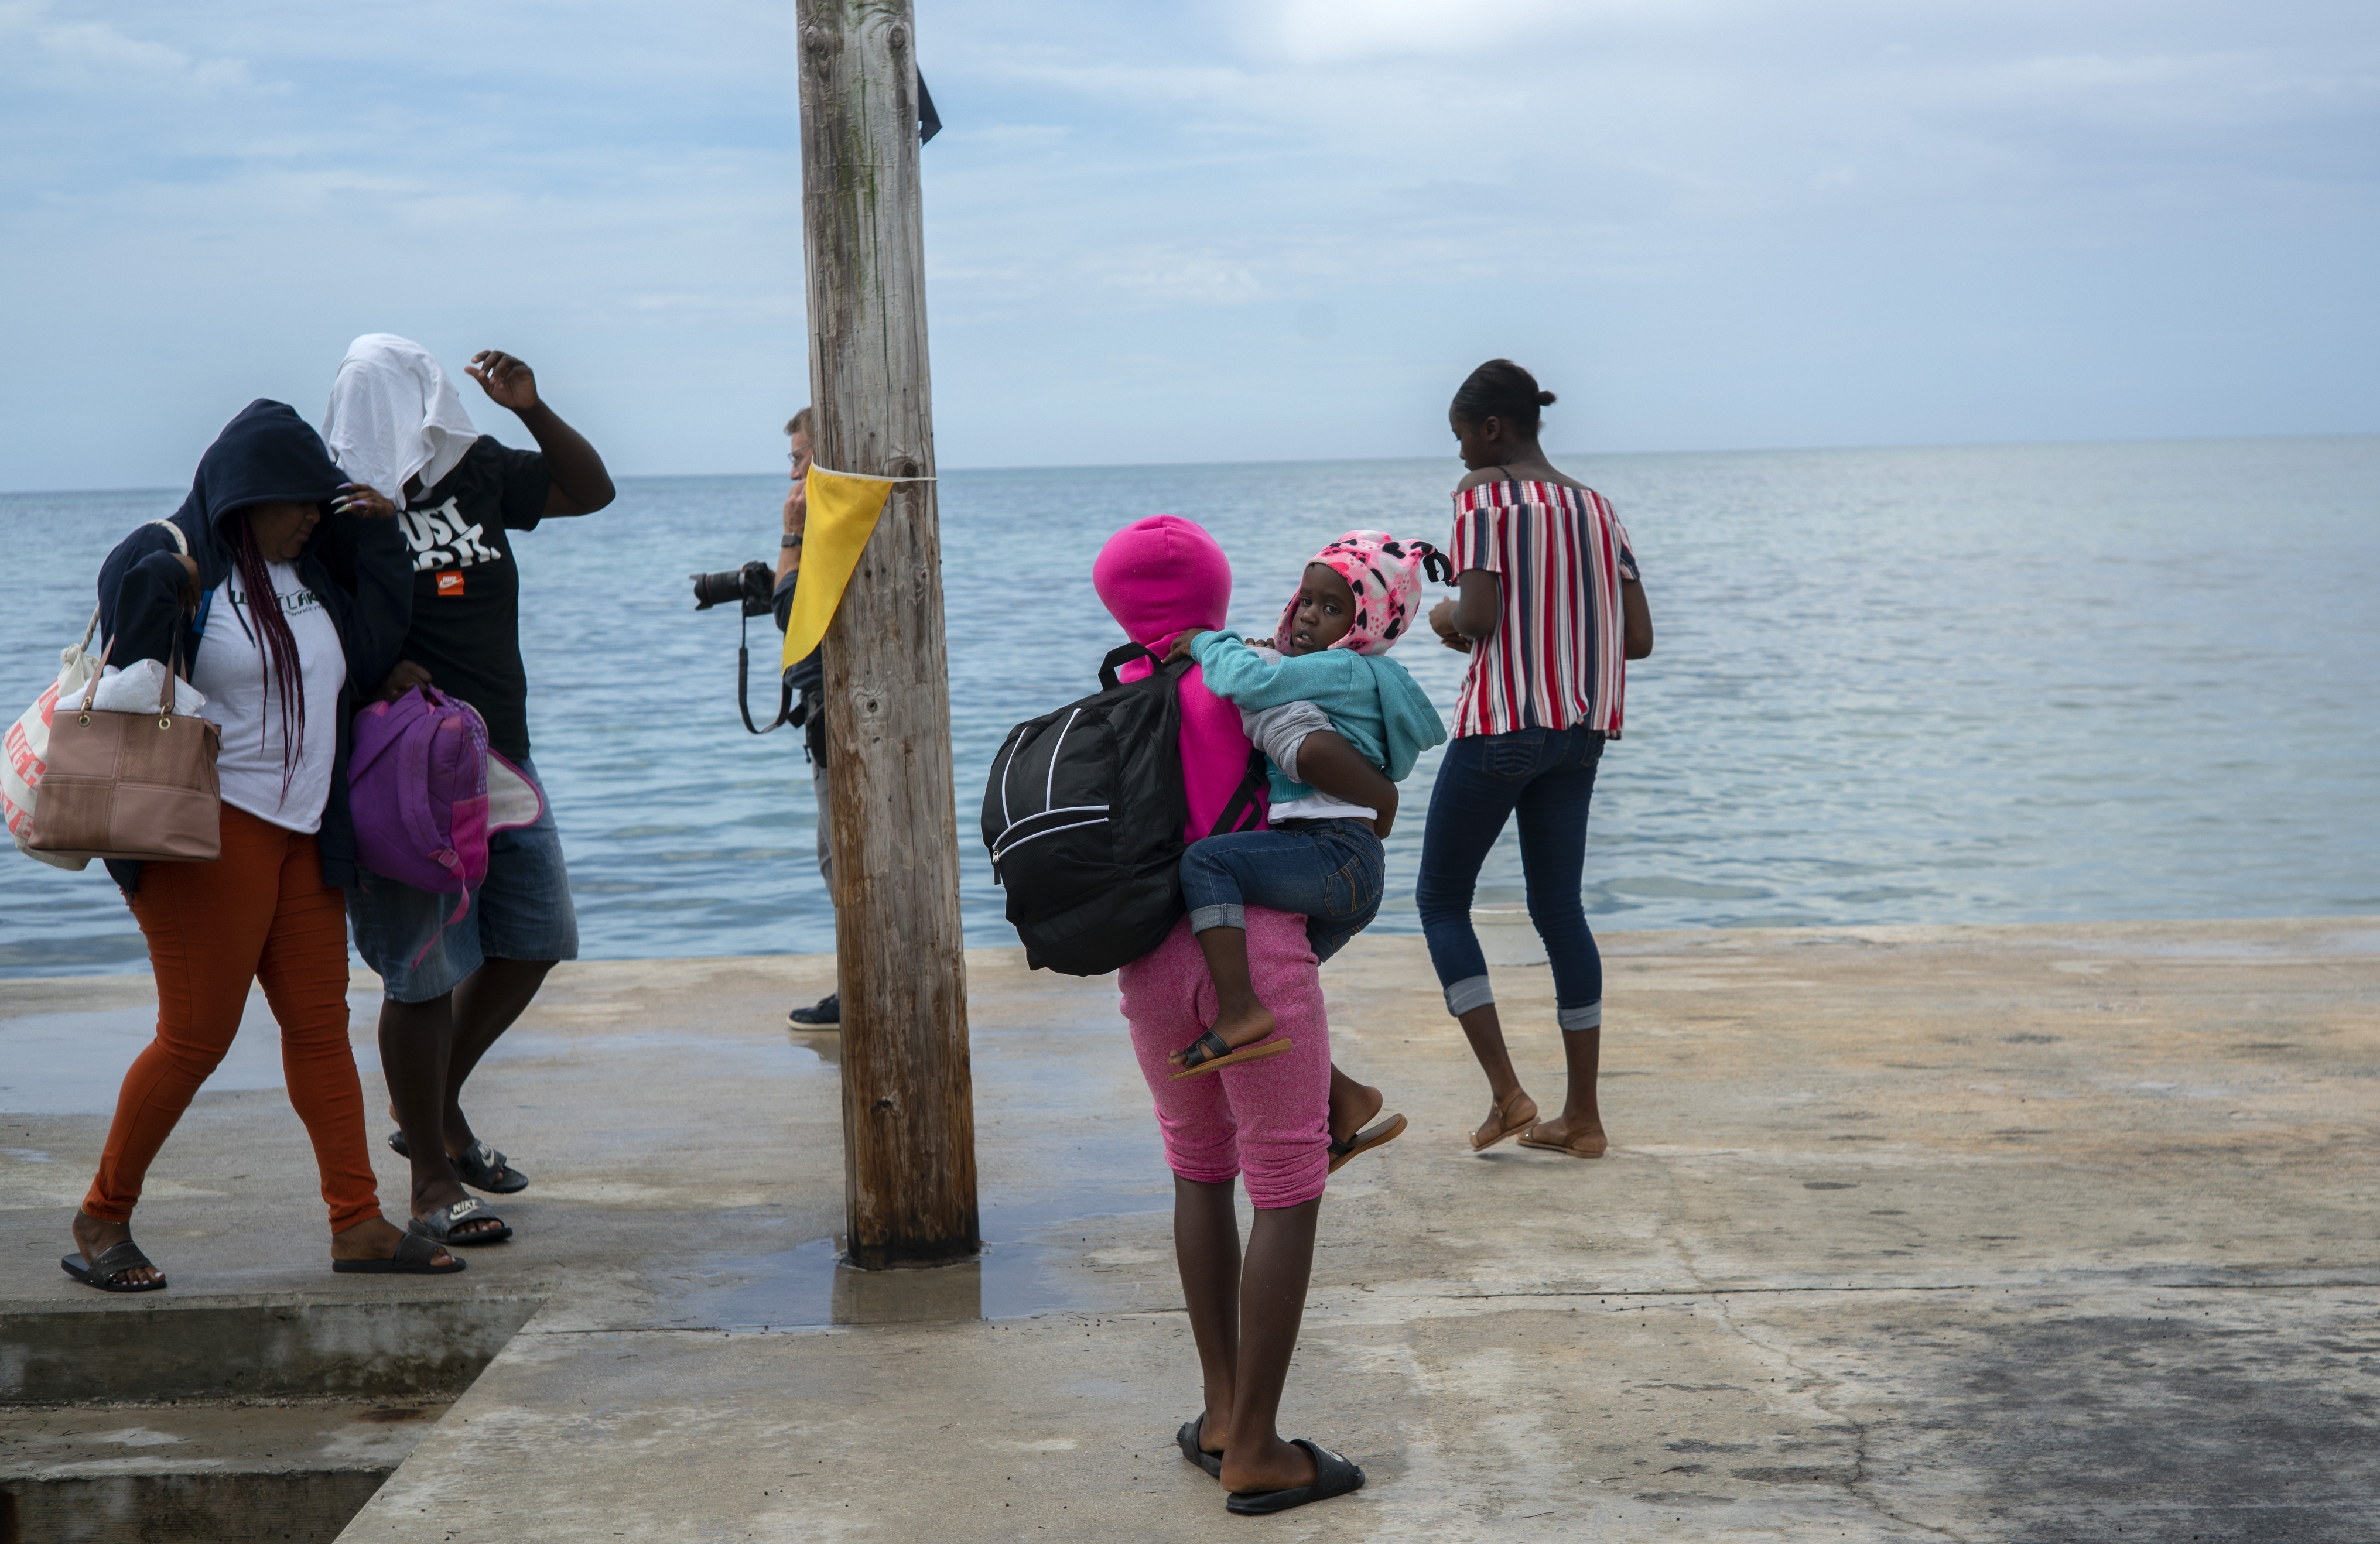 A woman carries a girl in her arms after being evacuated from a nearby Cay due to the danger of floods after arrive on a ship at the port before the arrival of Hurricane Dorian in Sweeting's Cay, Grand Bahama, Bahamas, Saturday Aug. 31, 2019.   Dorian bore down on the Bahamas as a fierce Category 4 storm Saturday, with new projections showing it curving upward enough to potentially spare Florida a direct hit but still threatening parts of the Southeast U.S. with powerful winds and rising ocean water that causes what can be deadly flooding. (AP Photo/Ramon Espinosa)